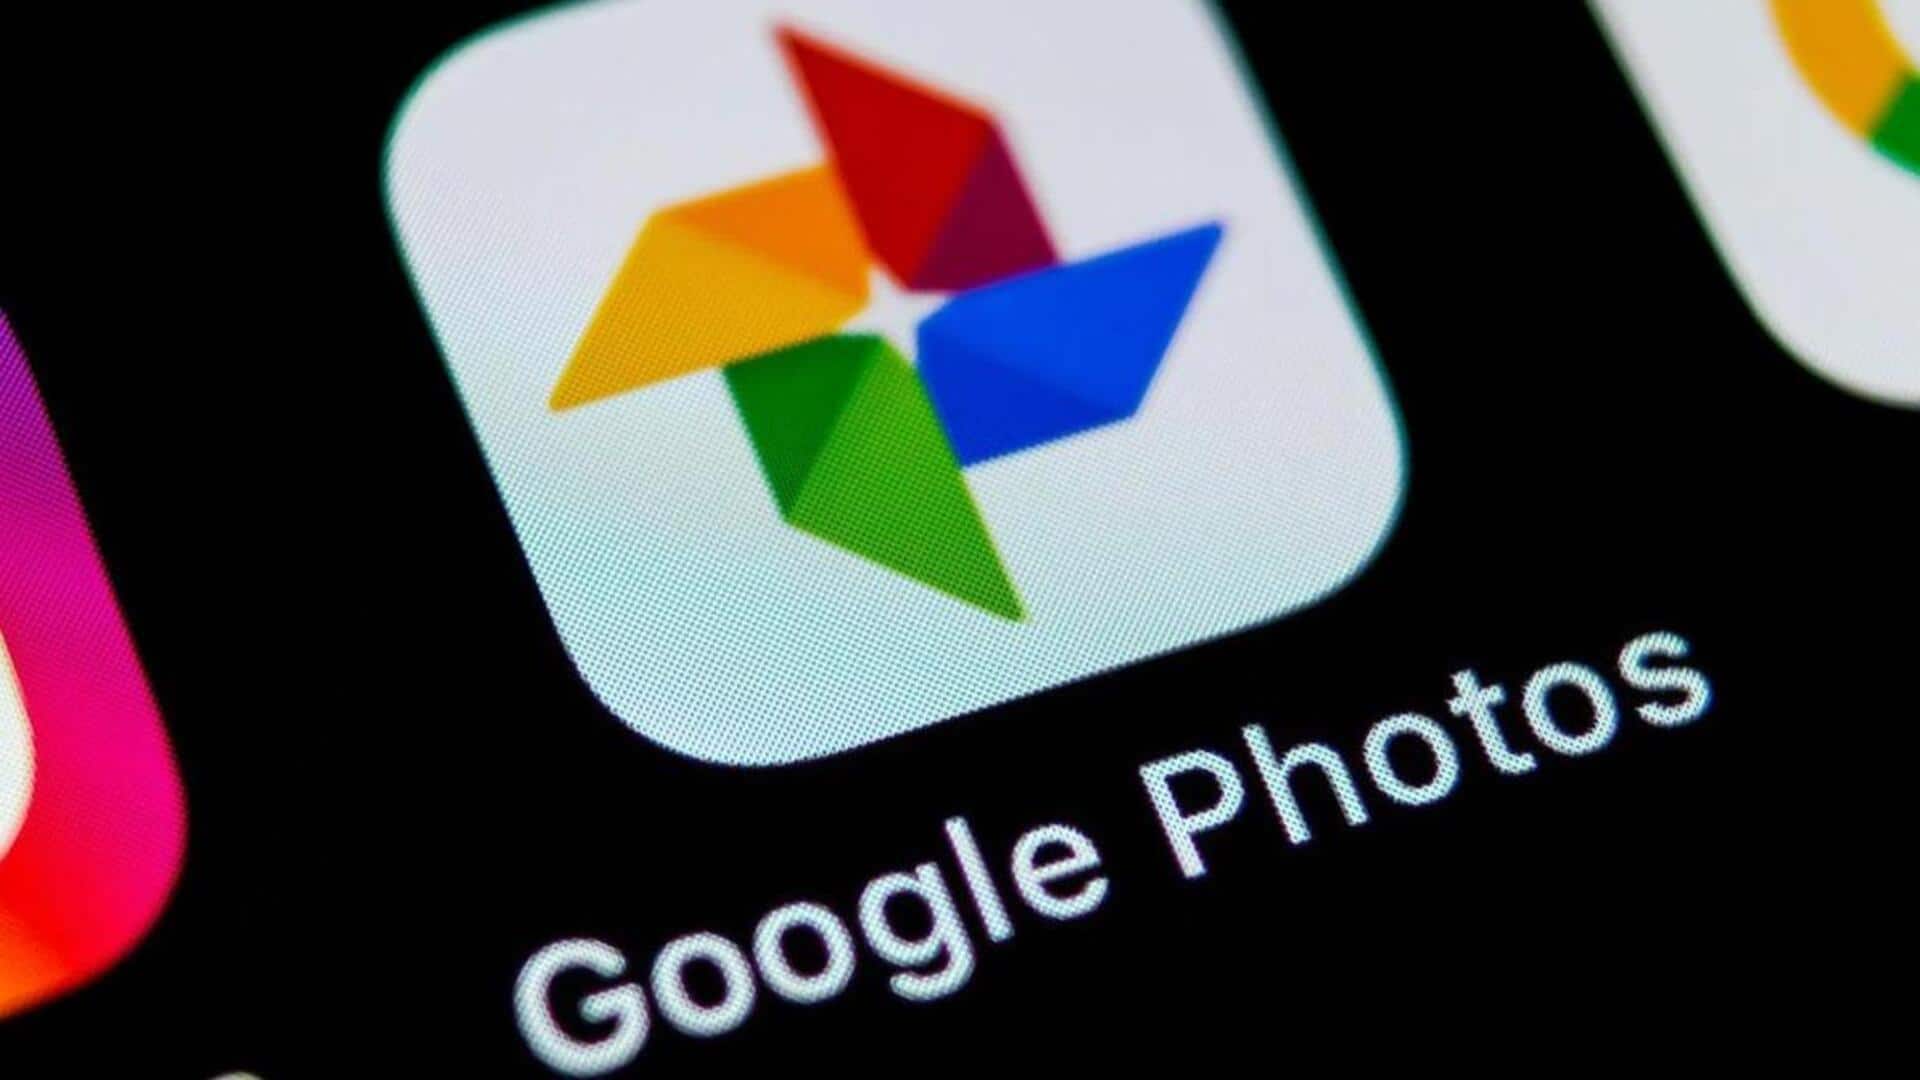 Google Photos introduces new feature to check storage saver eligibility